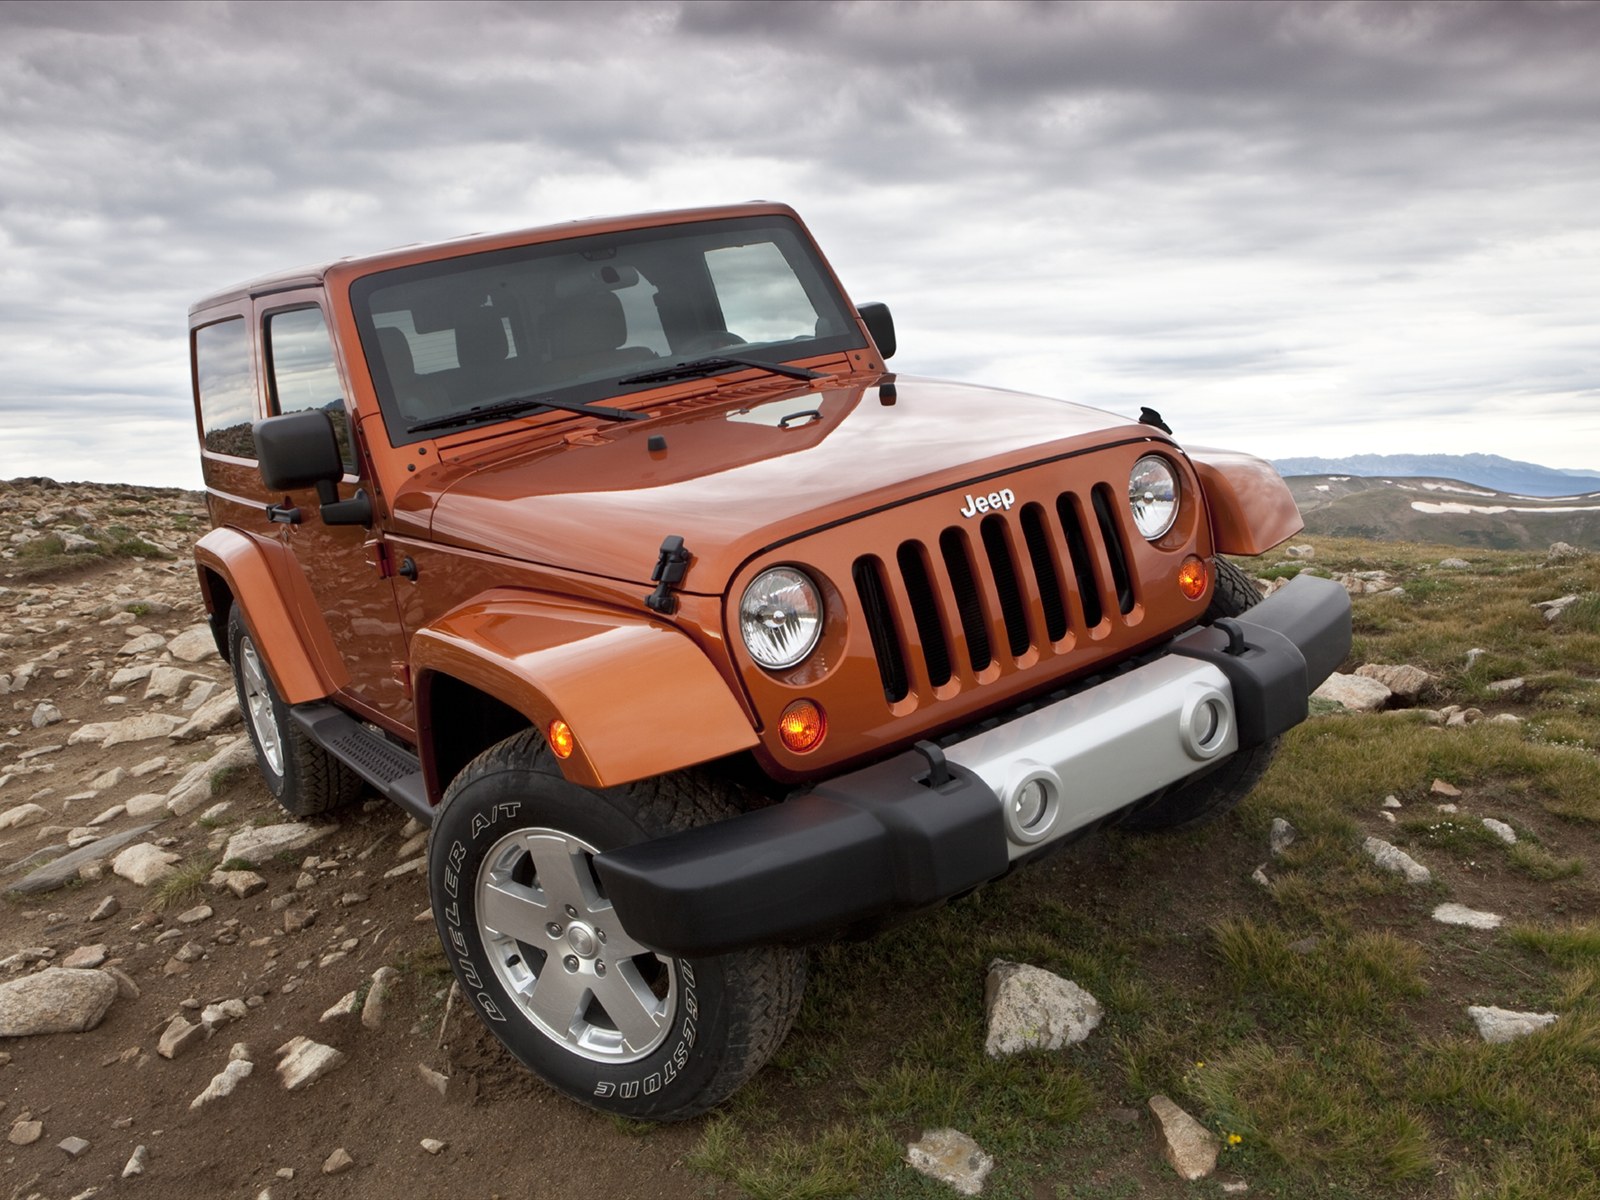 jeep wrangler 2011 car pictures wallpaper image photo free